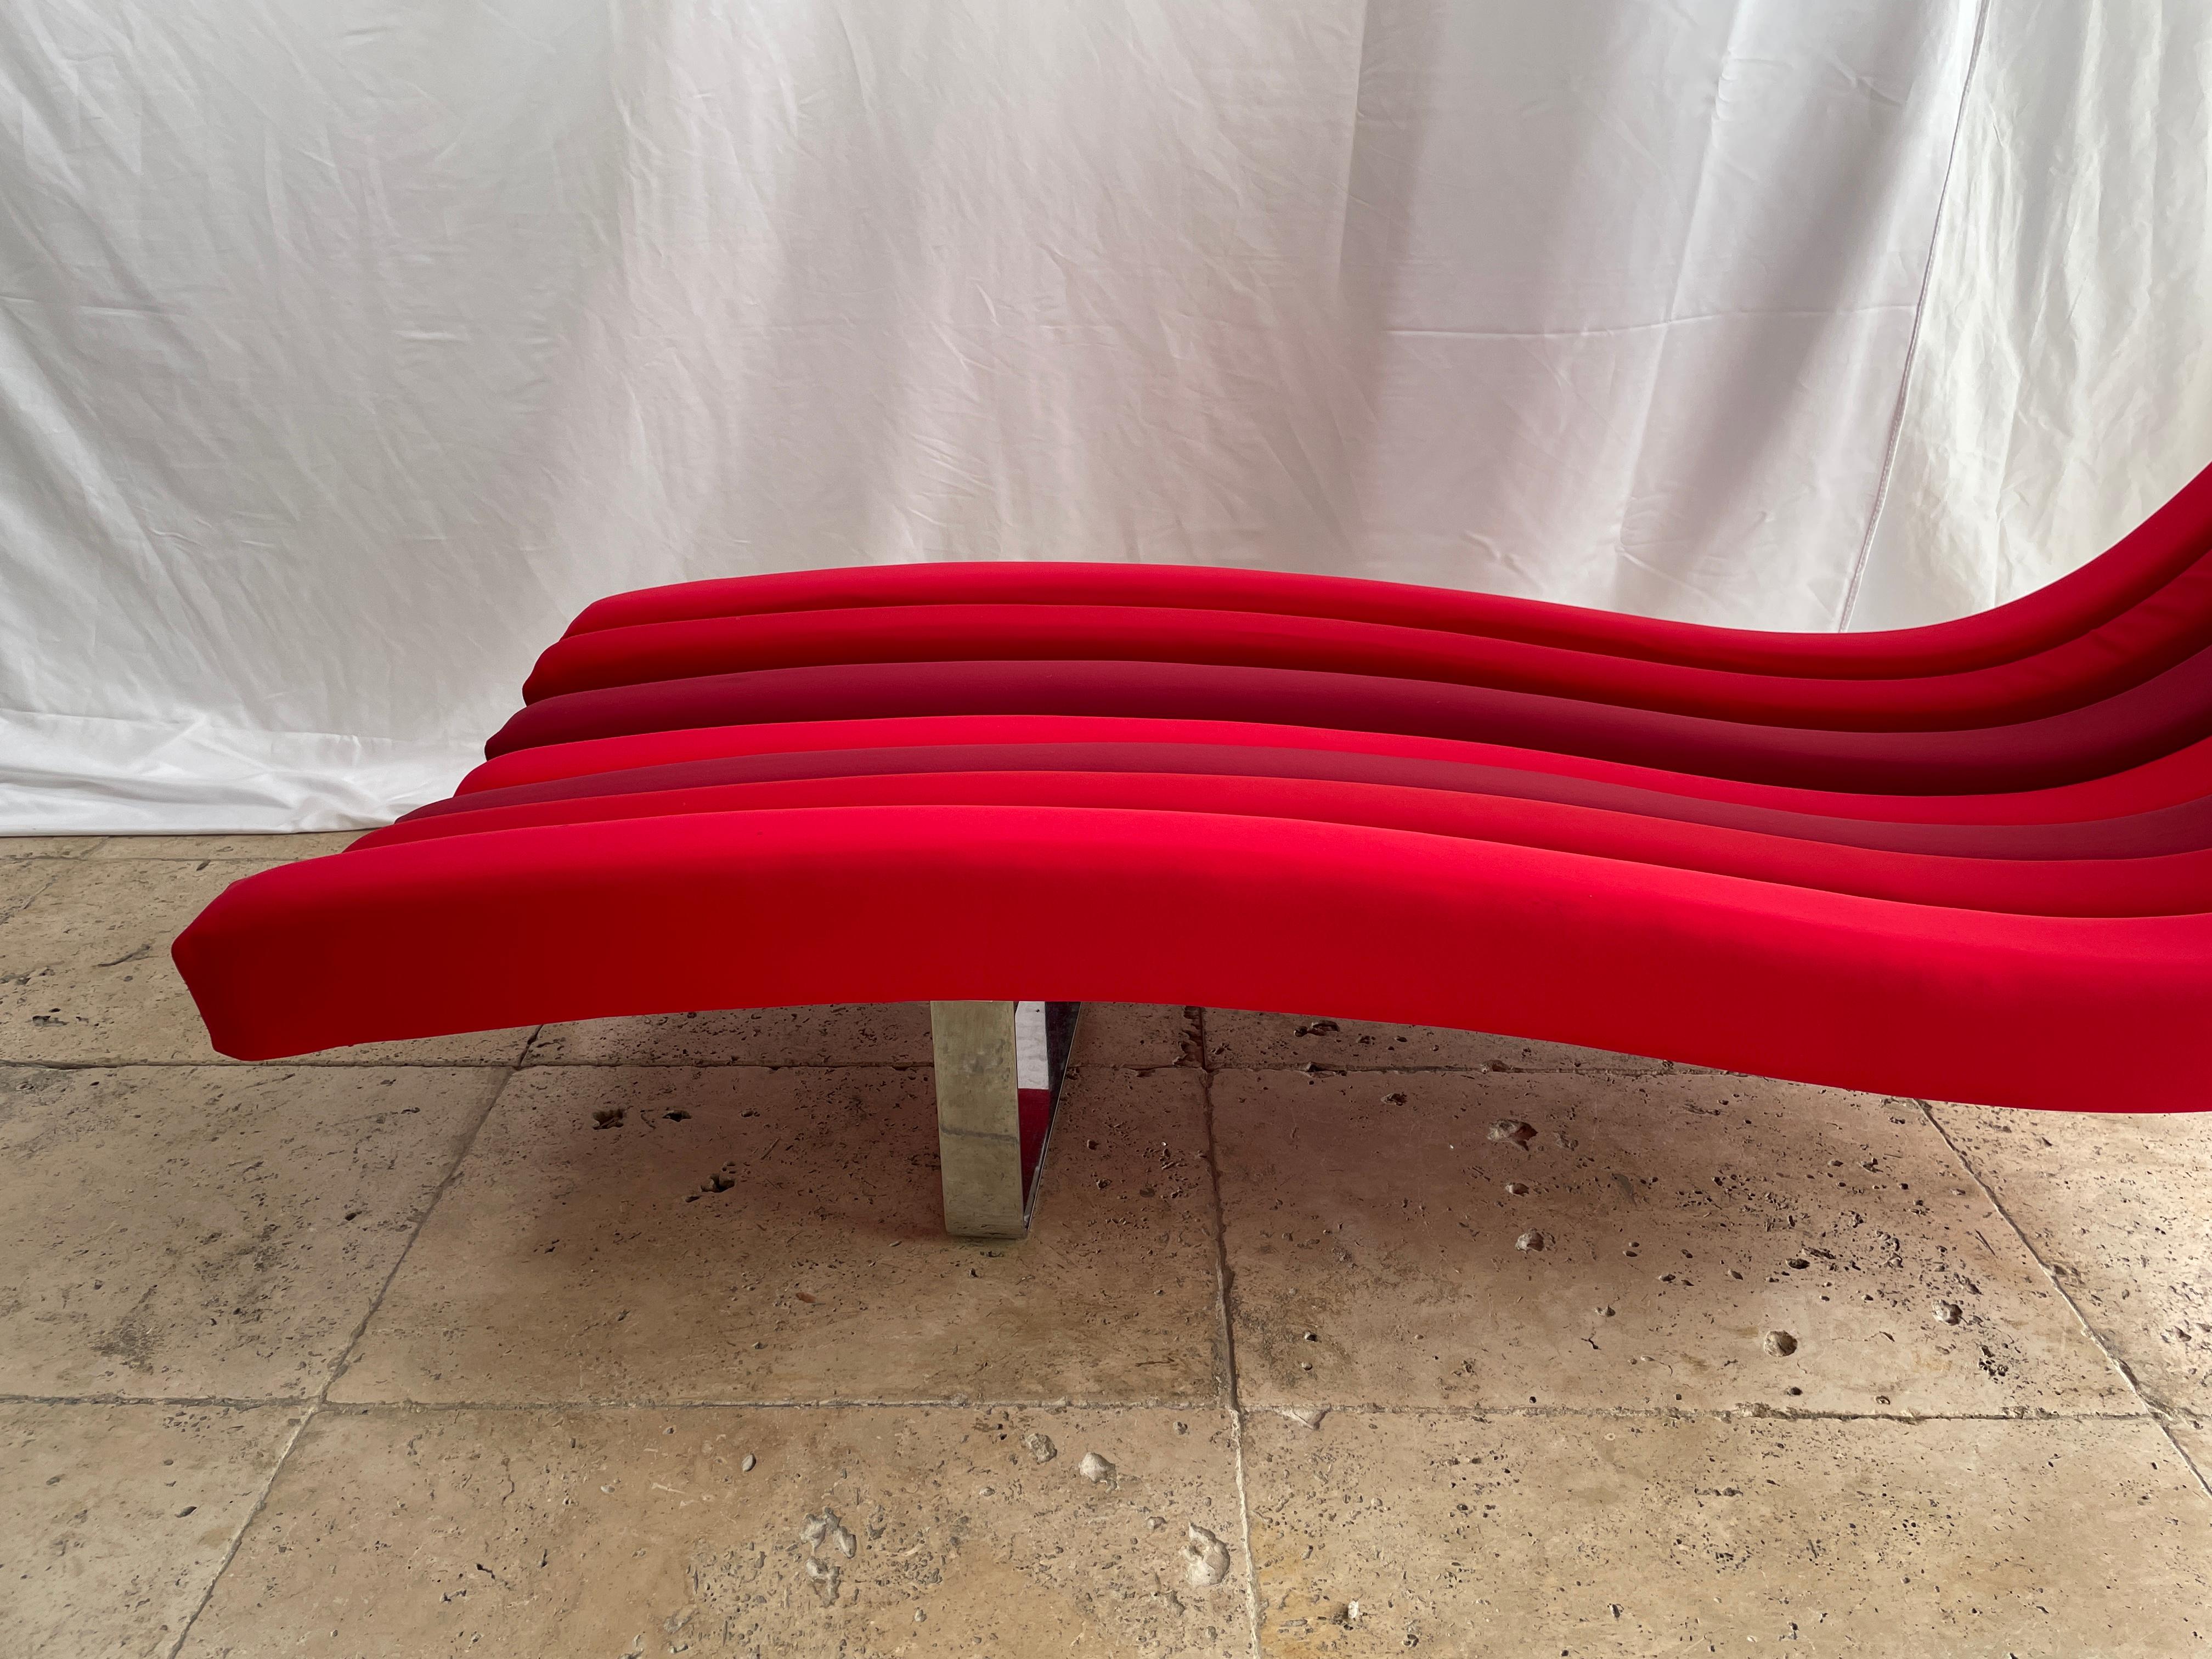 Contemporary Vitamine Chaise Longues by Roche Bobois, France